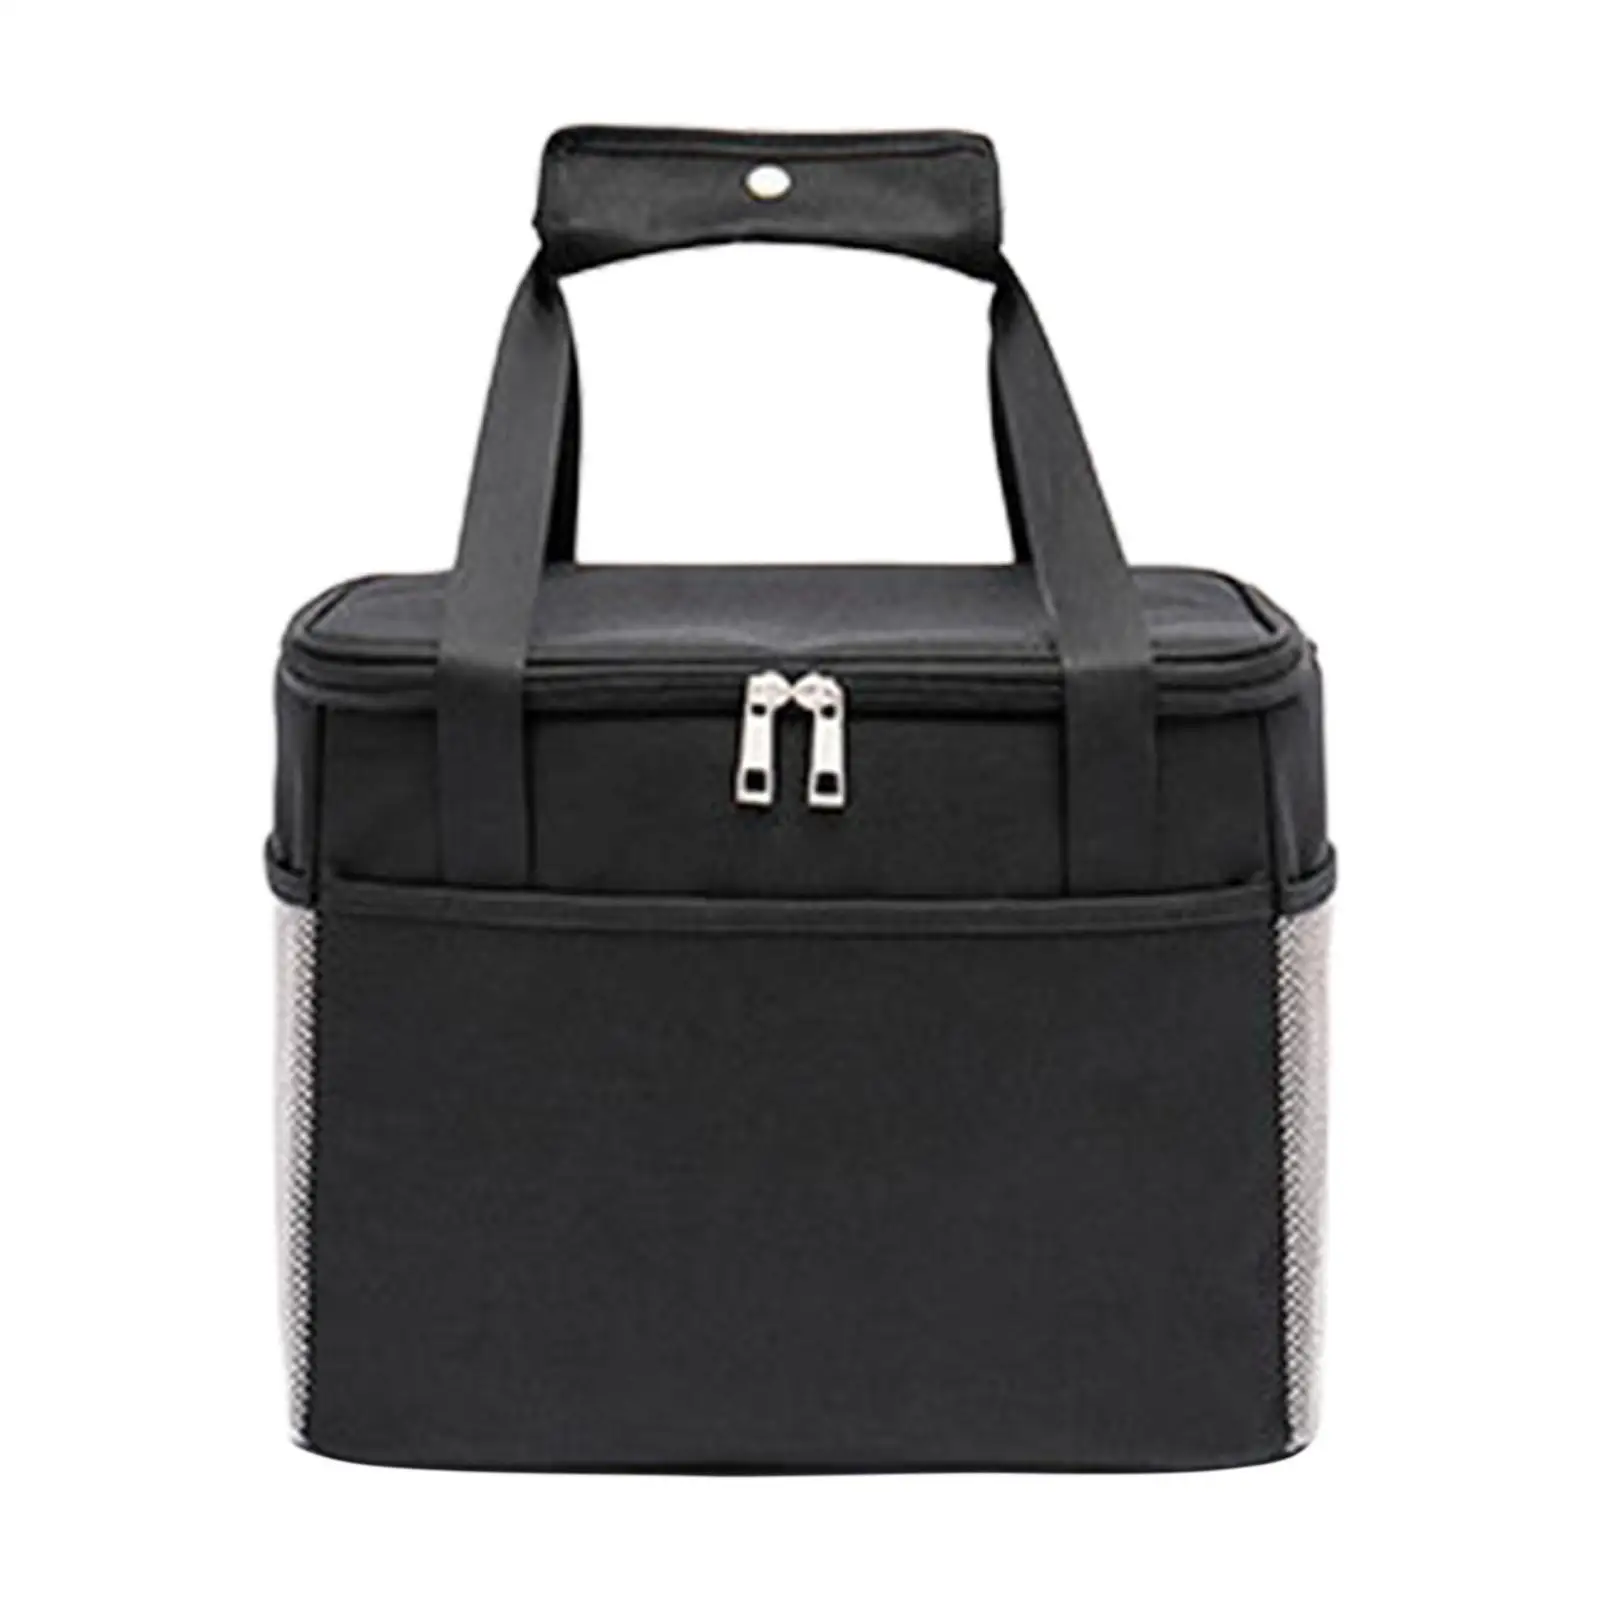 Insulated Cooler Bag Soft with Zipper Closure Waterproof Thermal Tableware Handbag Tote Bag for Party Beach Hiking Trip Camping